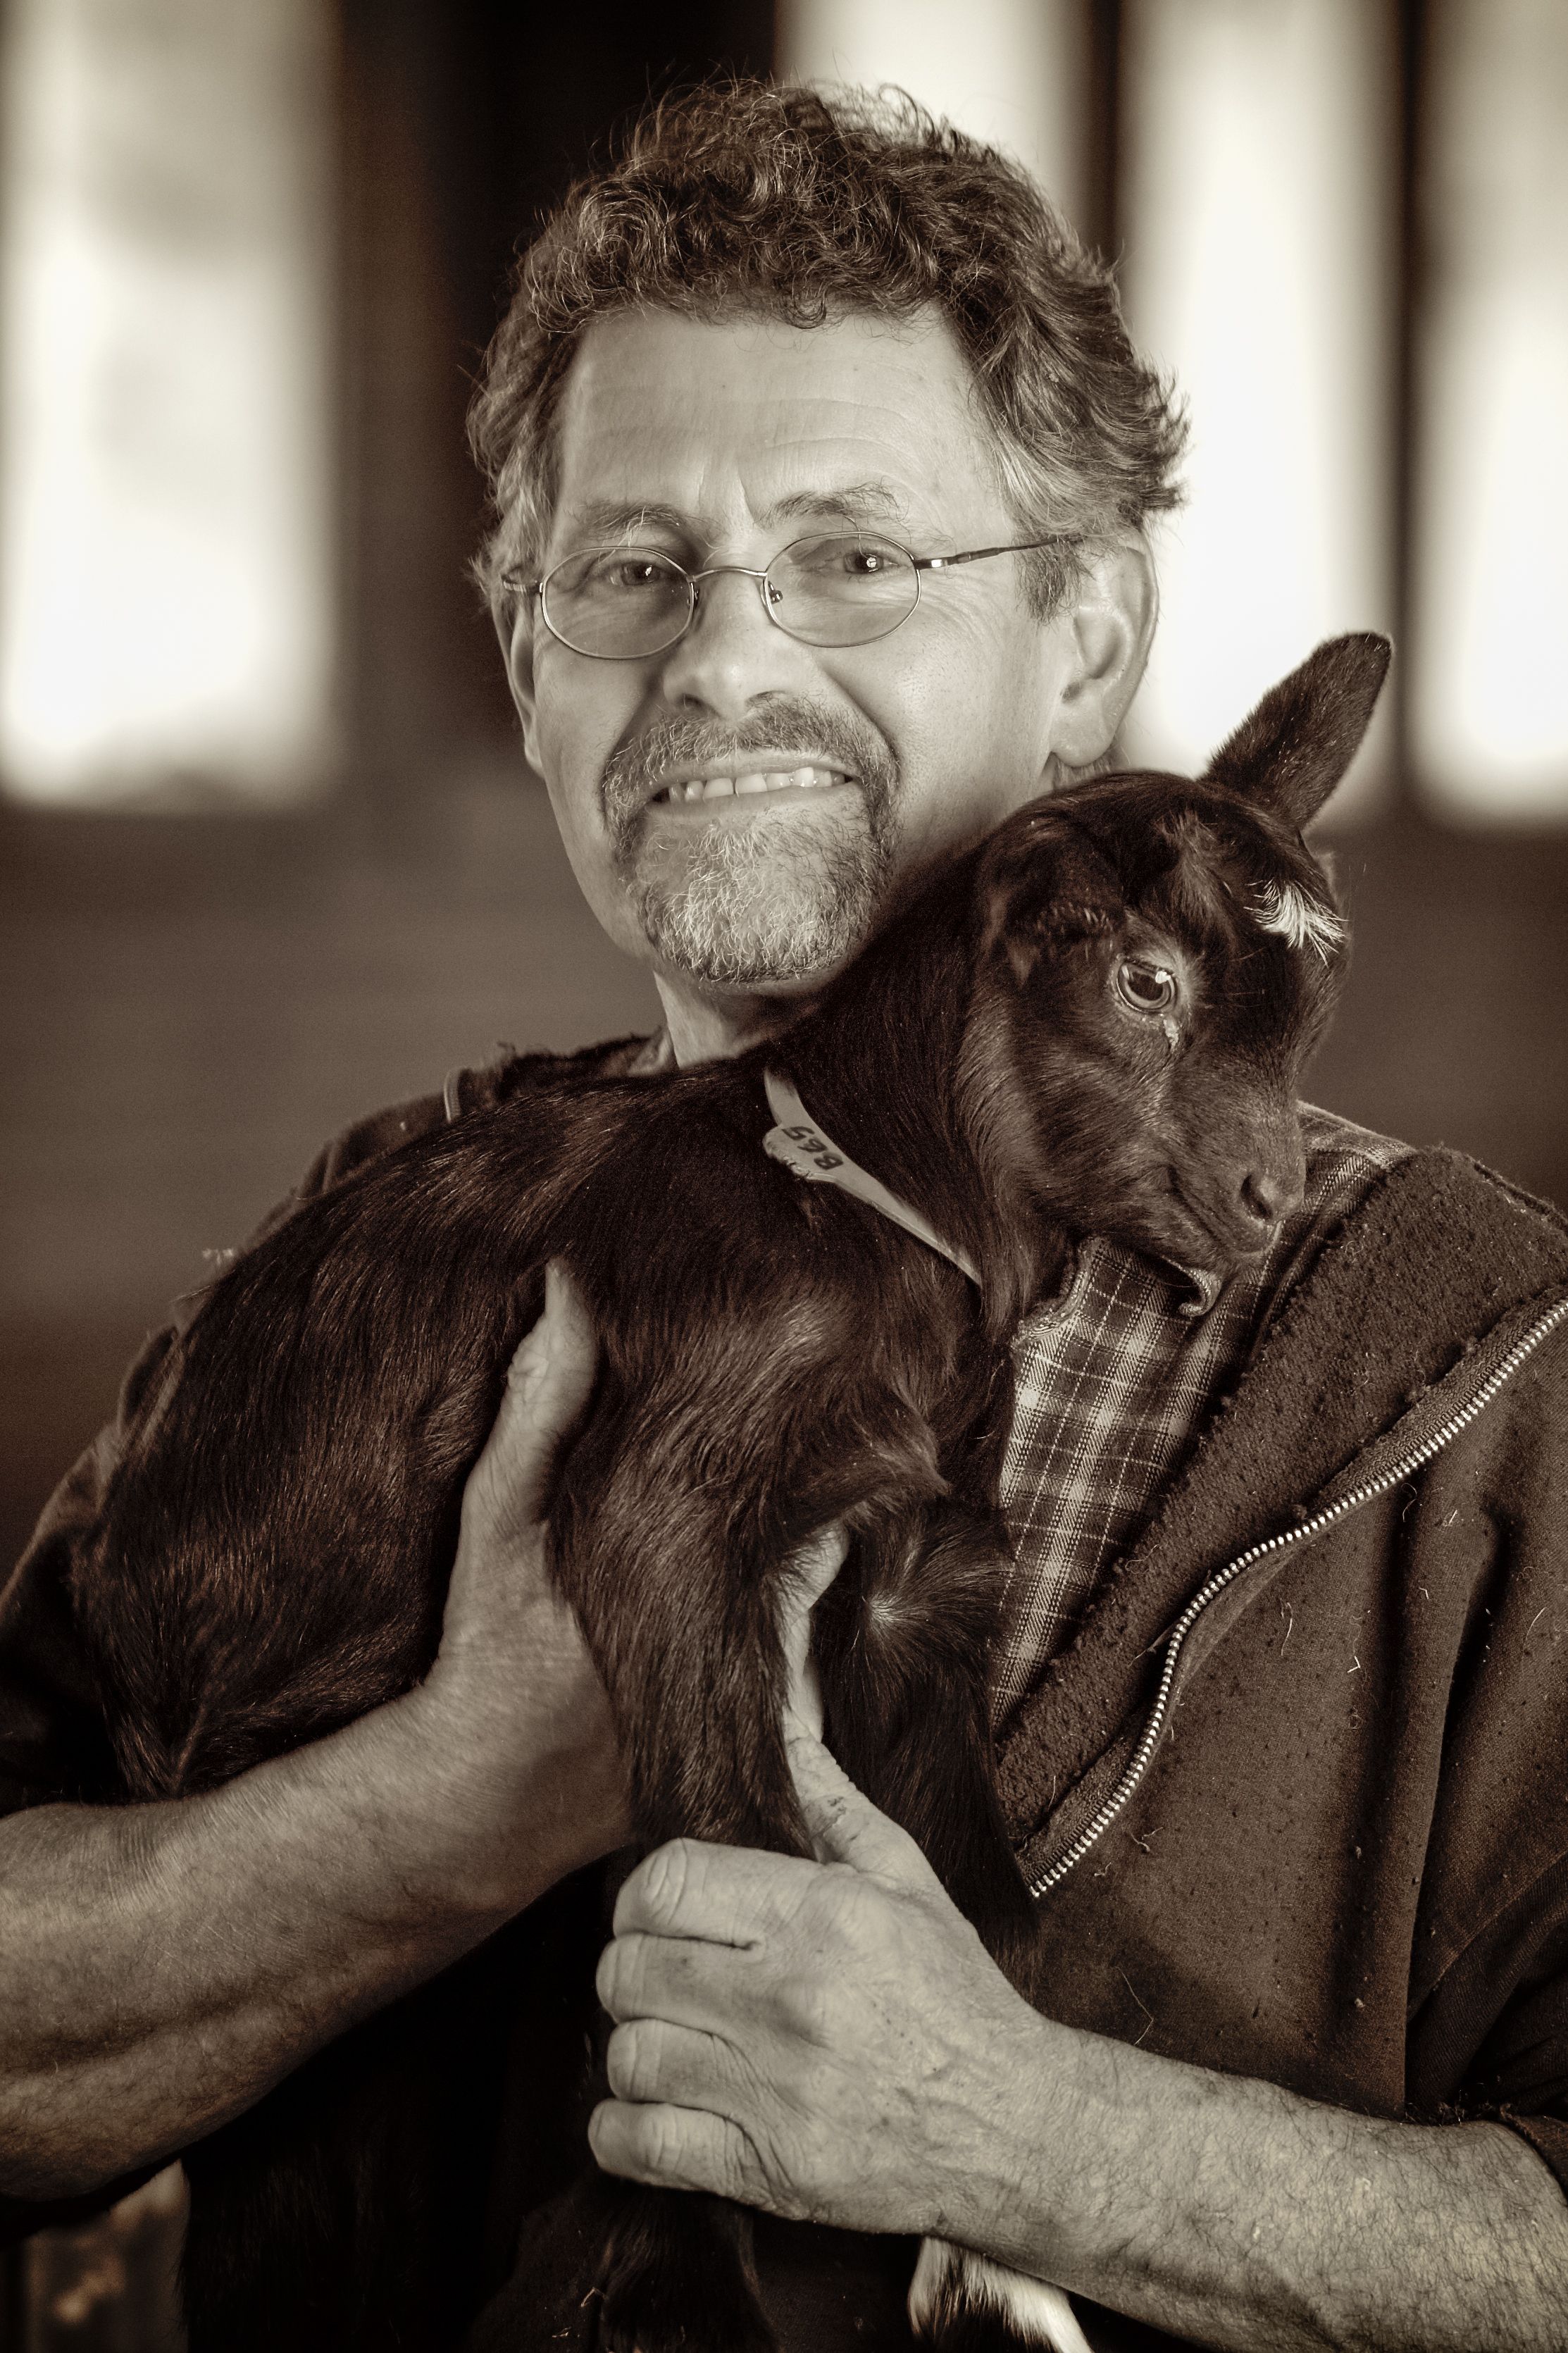 B&W portrait of man in glasses holding baby goat